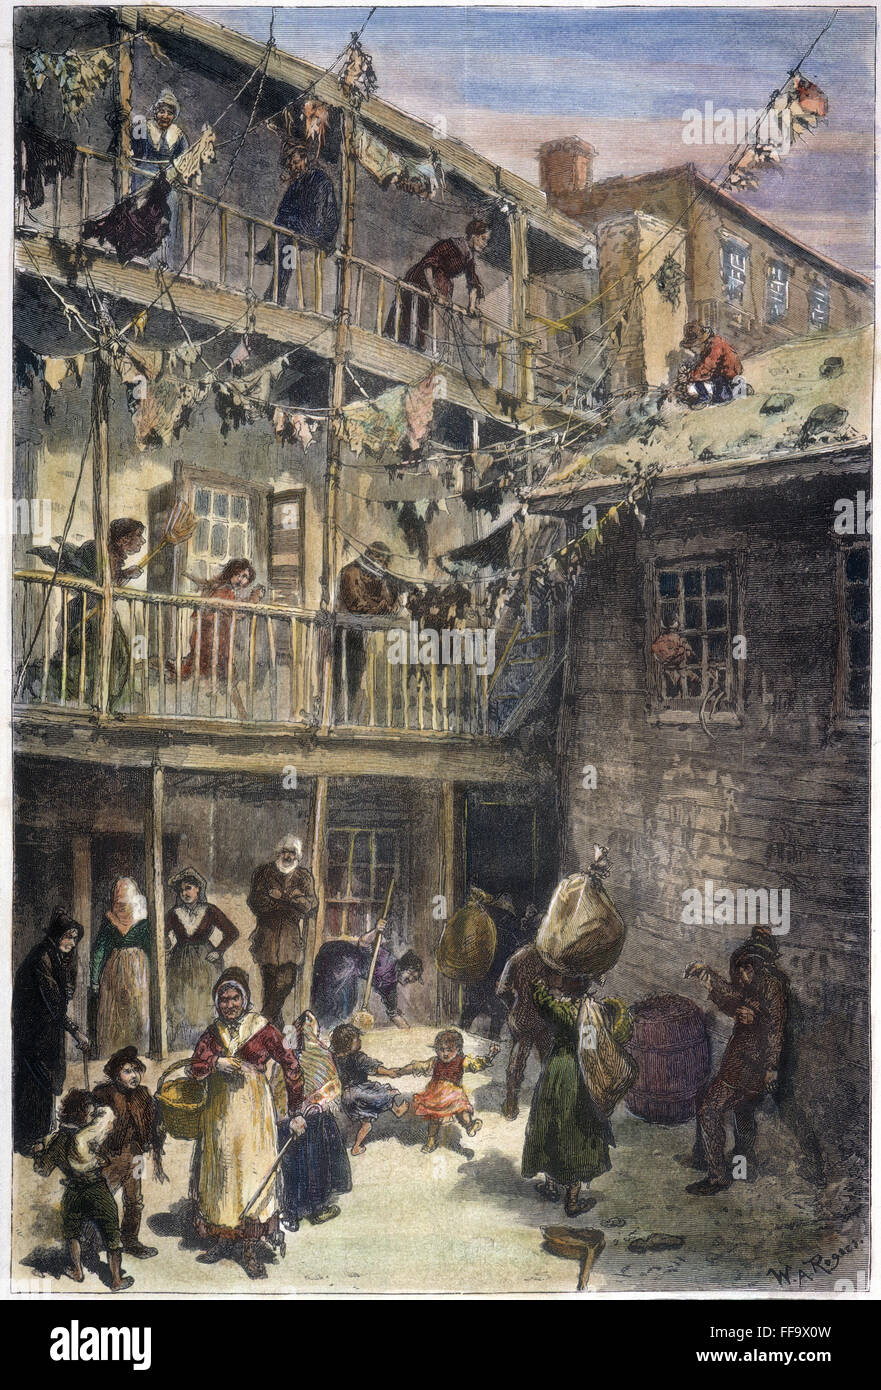 MULBERRY STREET, NYC, 1879. /n'Rag-Picker's Court' off Mulberry Street. Wood engraving, 1879, after William A. Rogers. Stock Photo